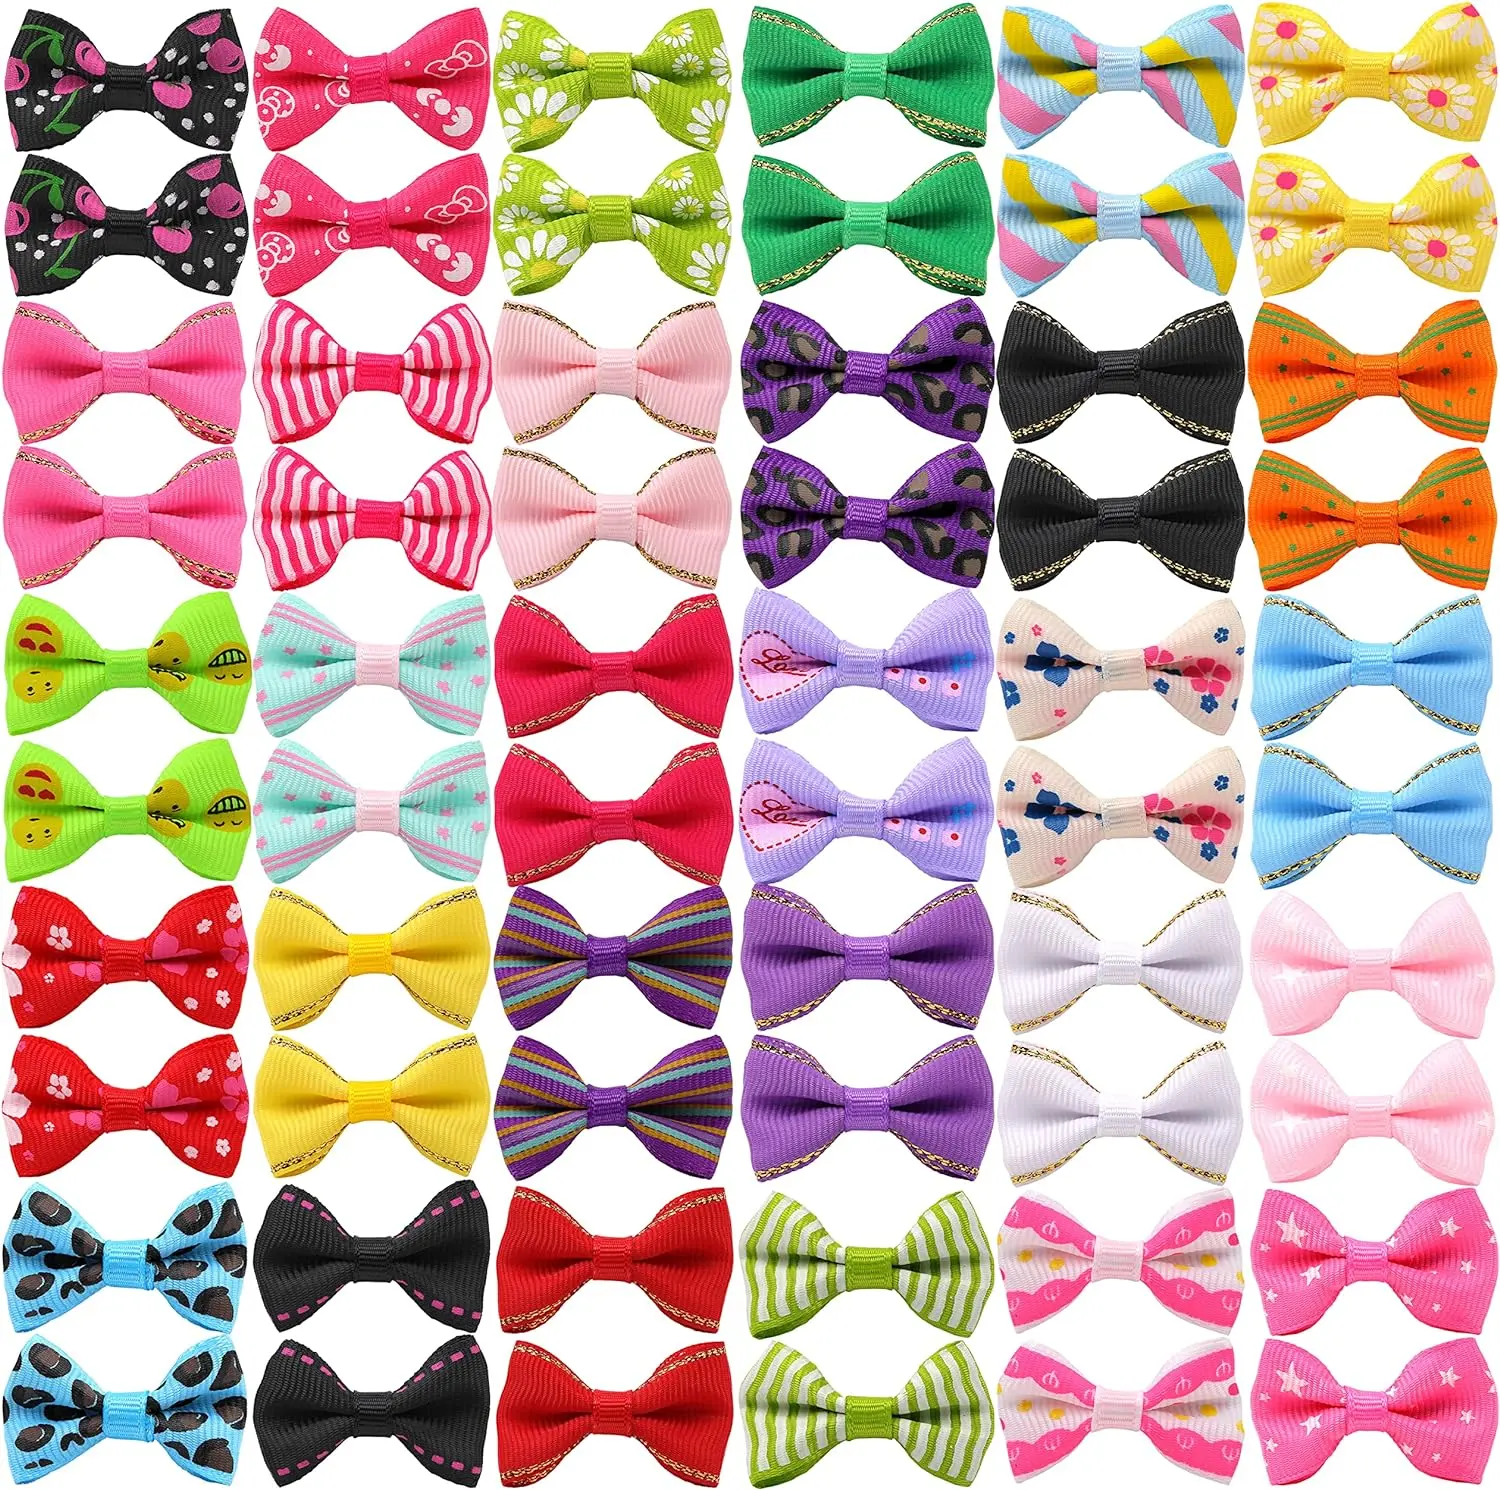 Puppy Pet Small Bowknot Hair Bows with Metal Clips Rubber Bands Handmade Dog Hair Accessories Bow Pet Grooming Products